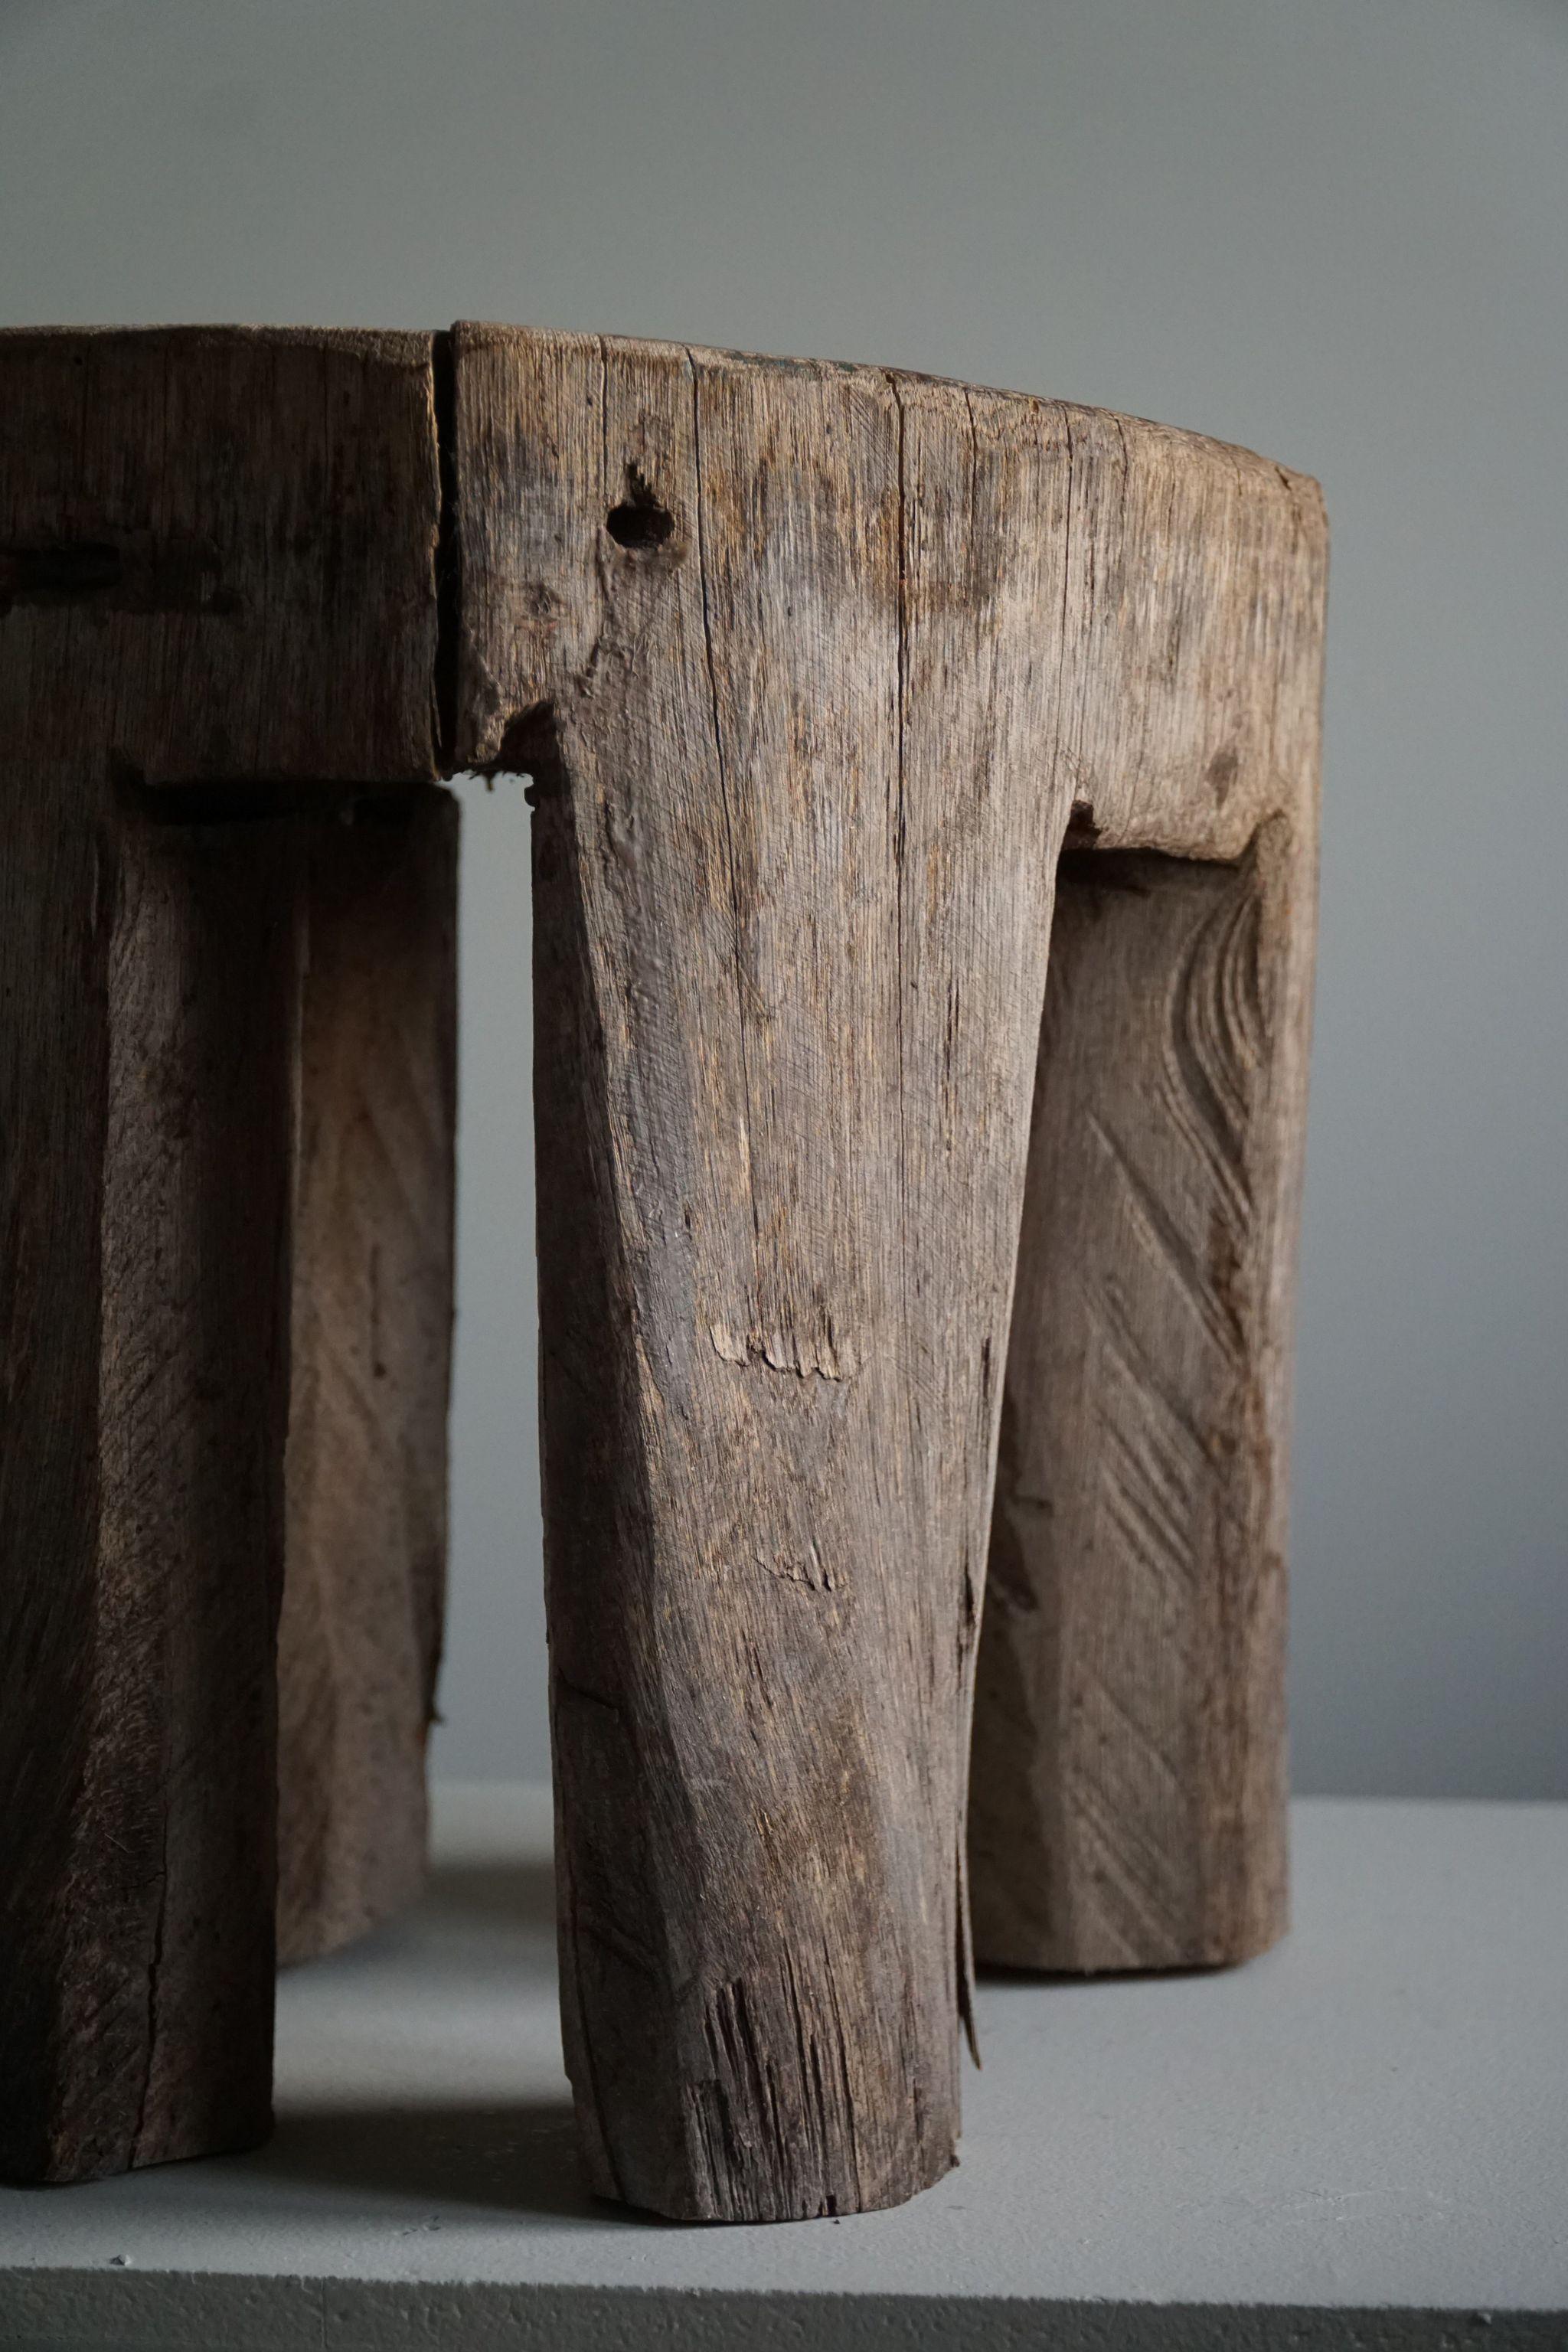 A true decorative organic shape wabi sabi stool in solid wood. Hand carved by a Swedish cabinetmaker in the 1800s.

This primitive stool will fit in many types of home decors as a sculptural object. A modern, Scandinavian or an Art Deco interior